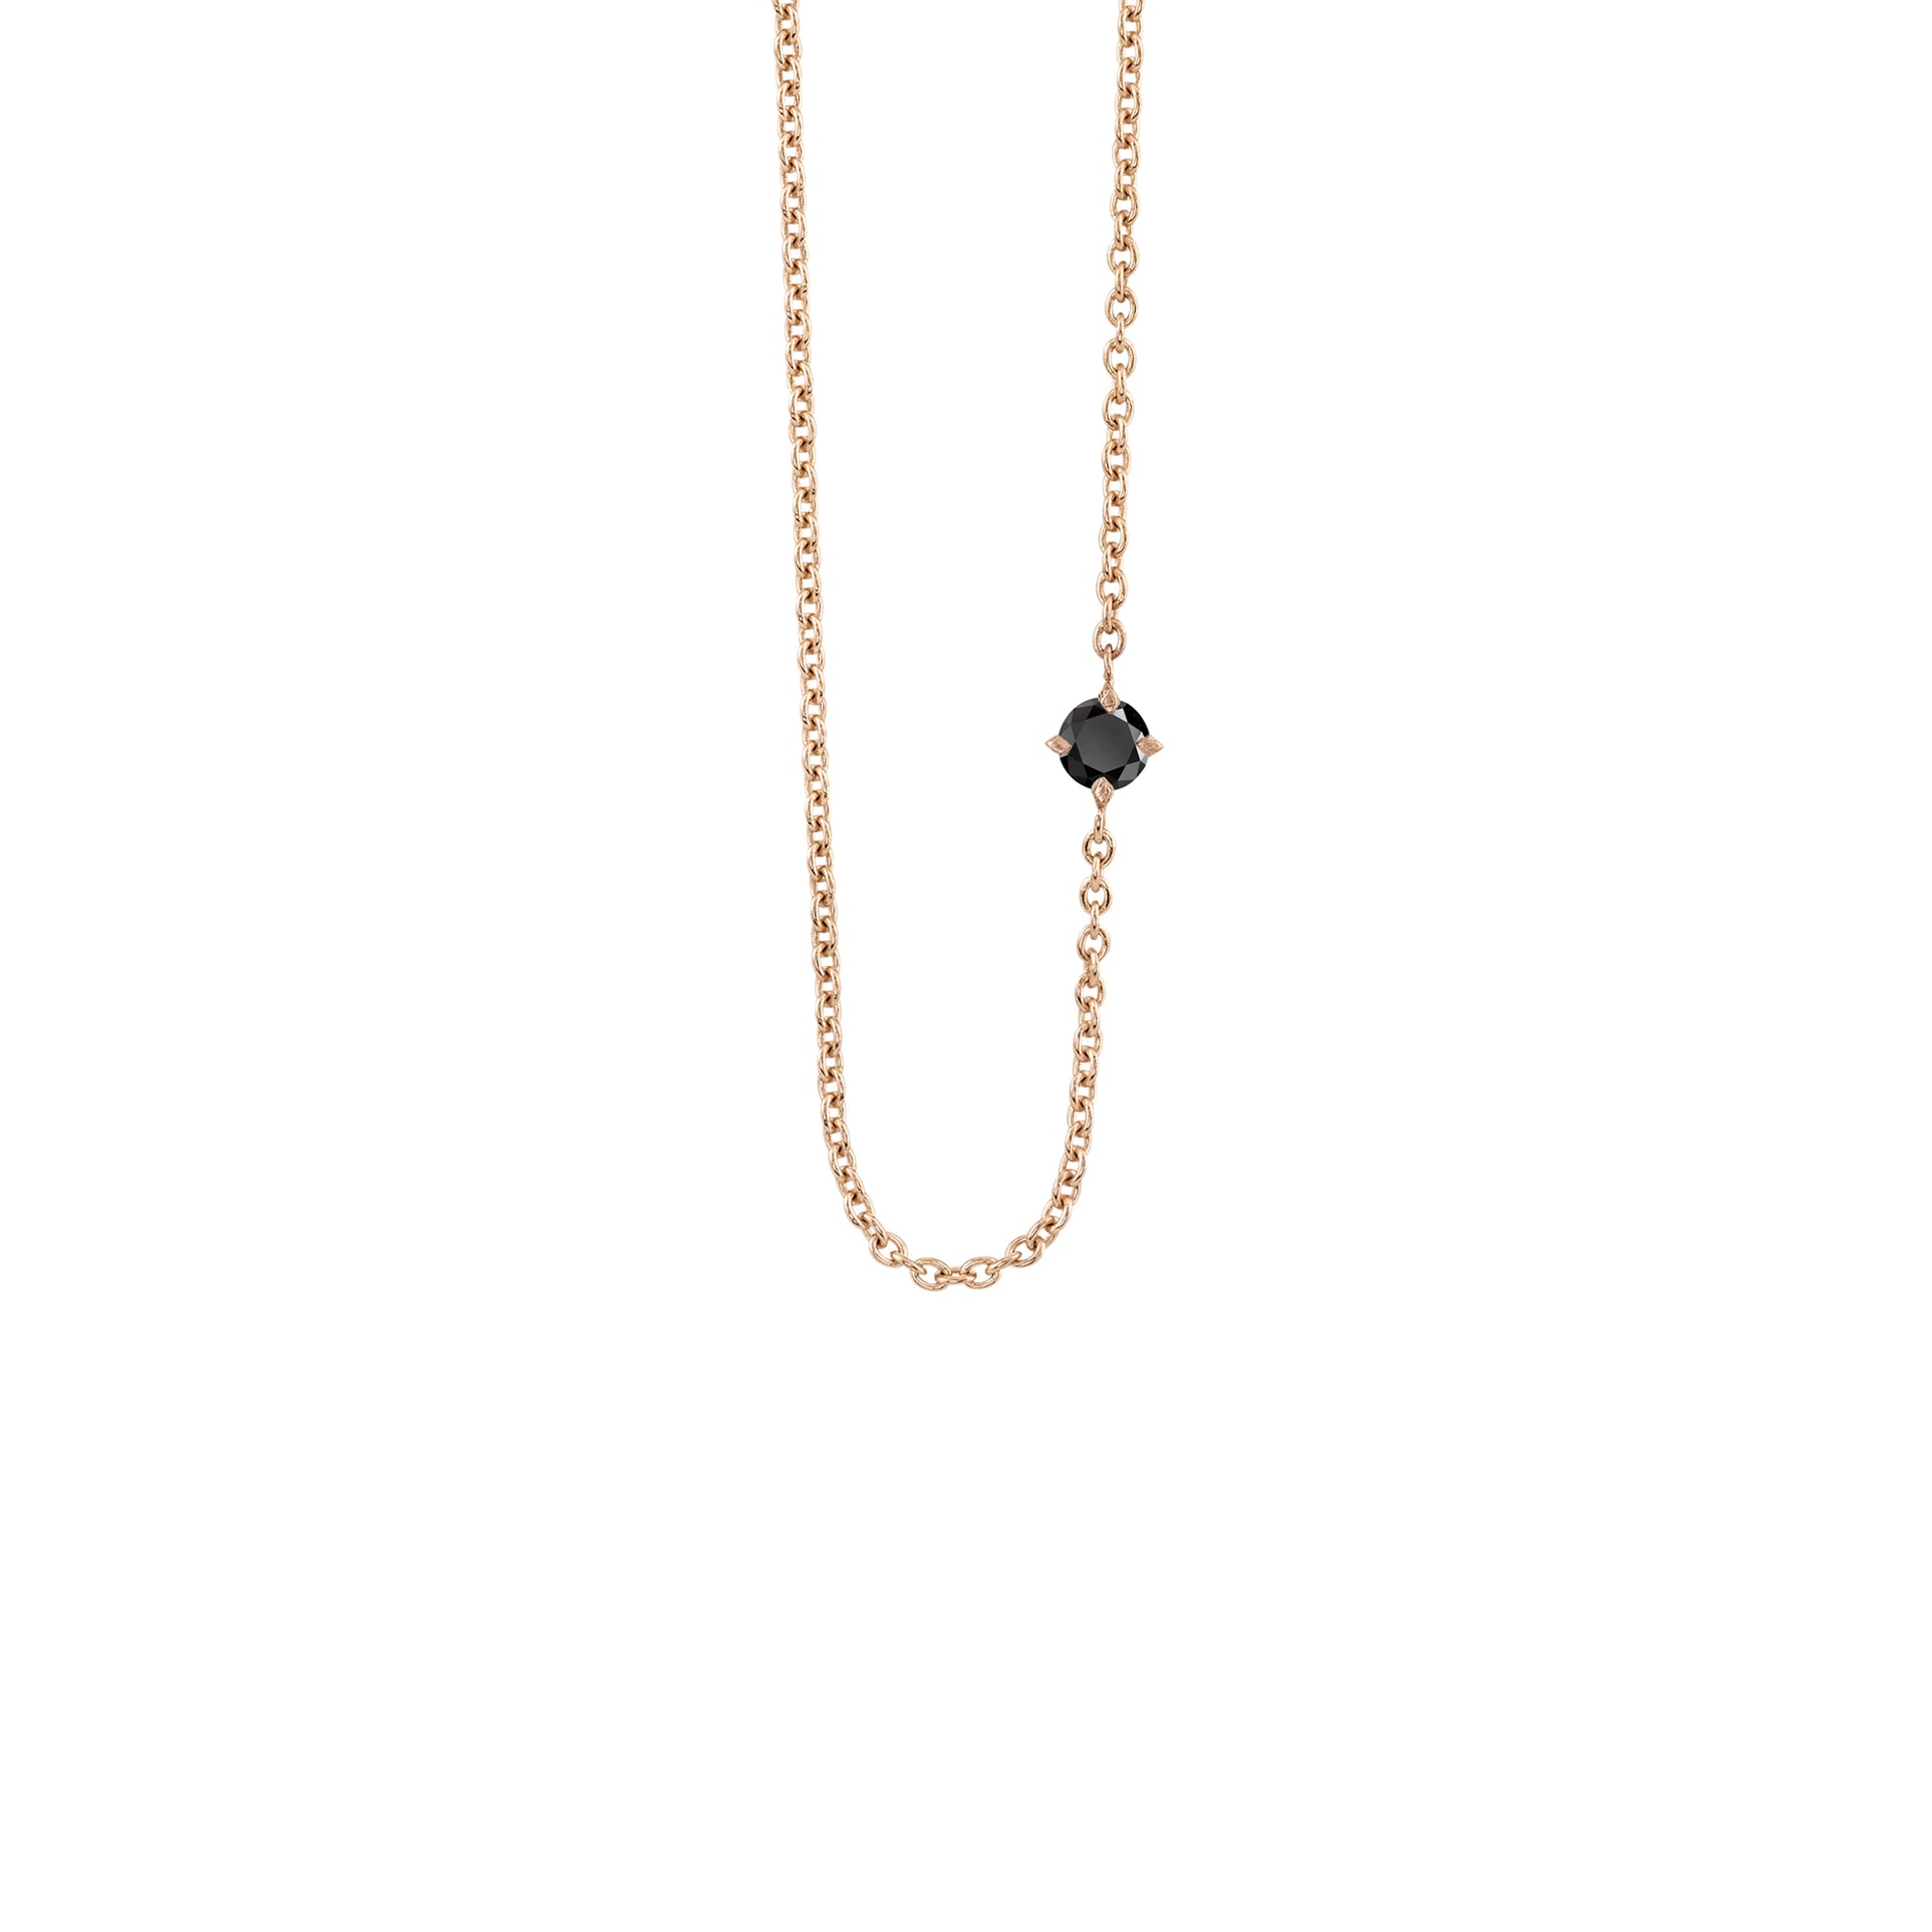 Two-sided Prong Set Diamond Necklace by Lizzie Mandler - NEWTWIST